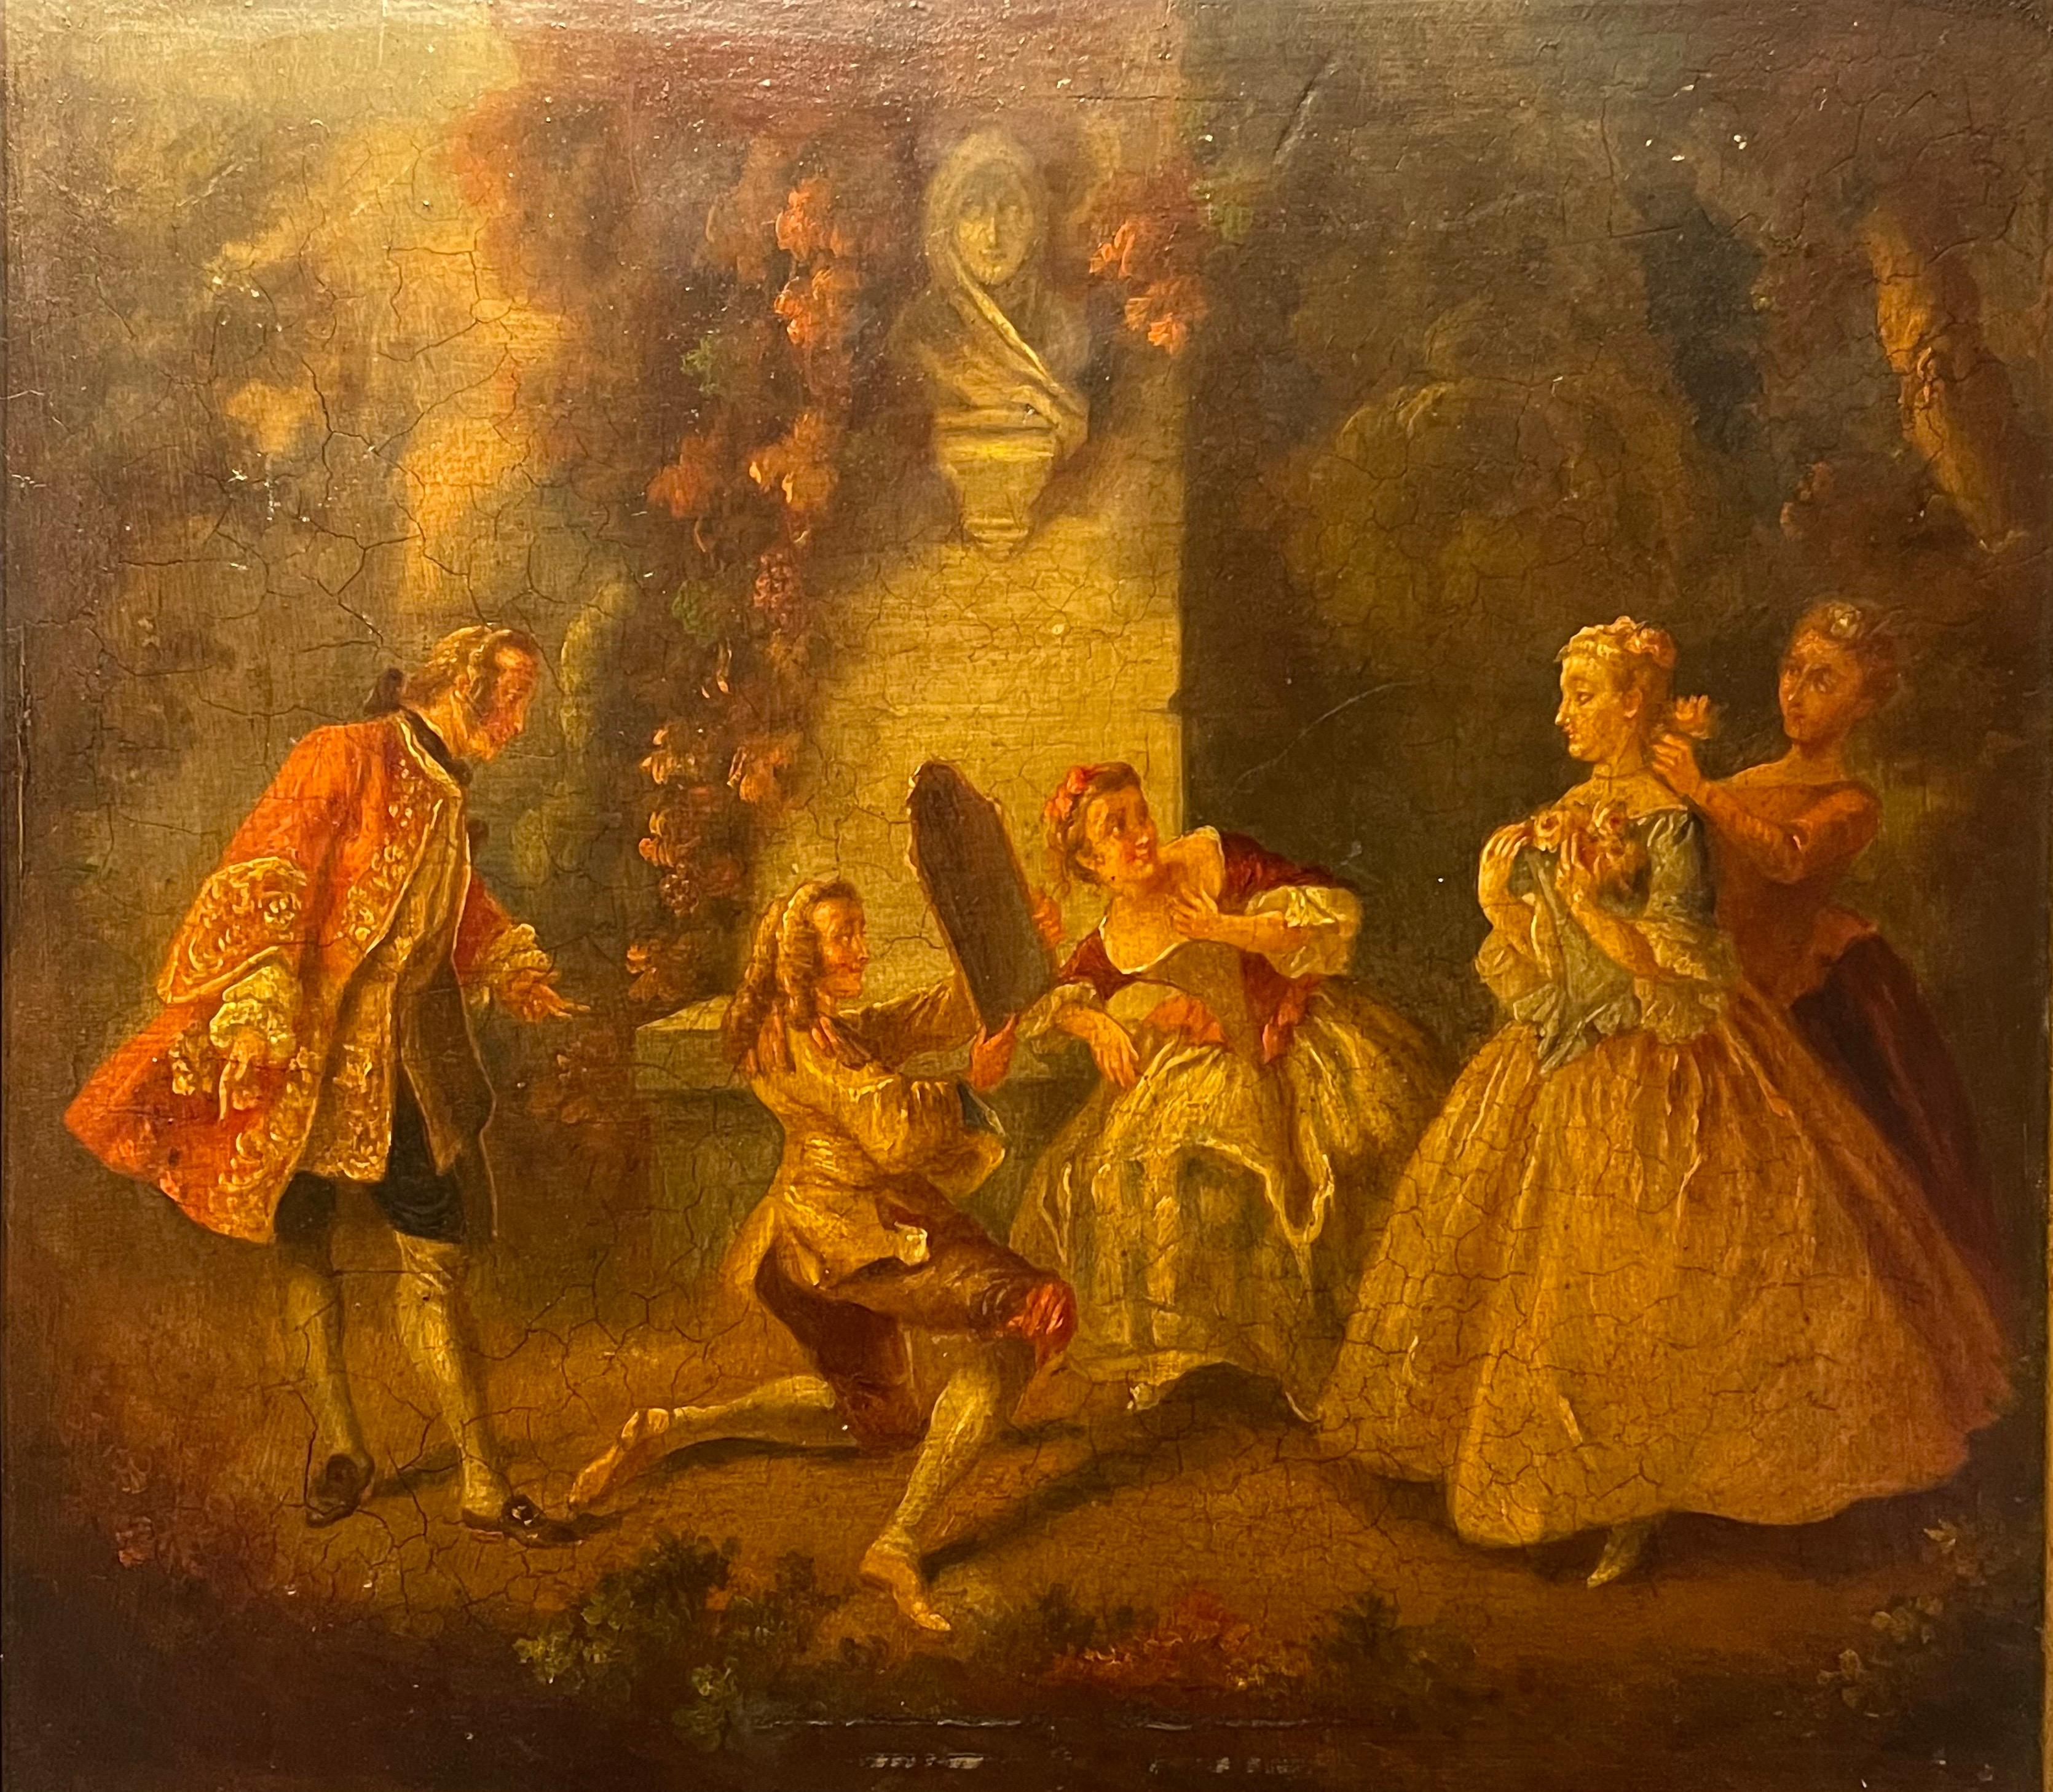 Unknown Figurative Painting - 18th CENTURY FRENCH ROCOCO OIL ON WOOD PANEL - ELEGANT FIGURES IN PARKLAND